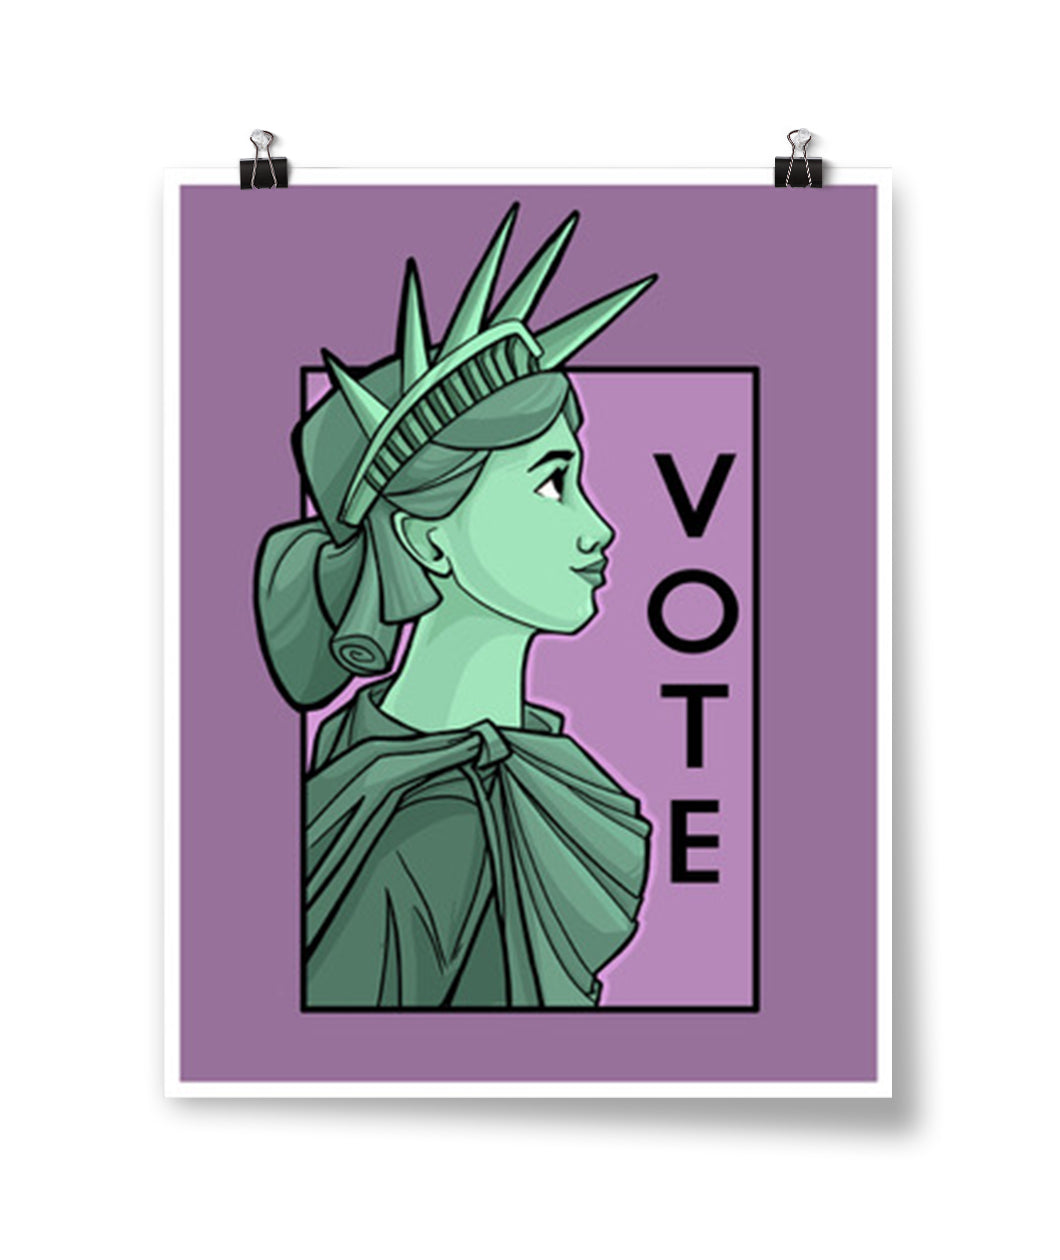 A purple poster from Karen Hallion showing the green, profile of the Statue of Liberty with the word 